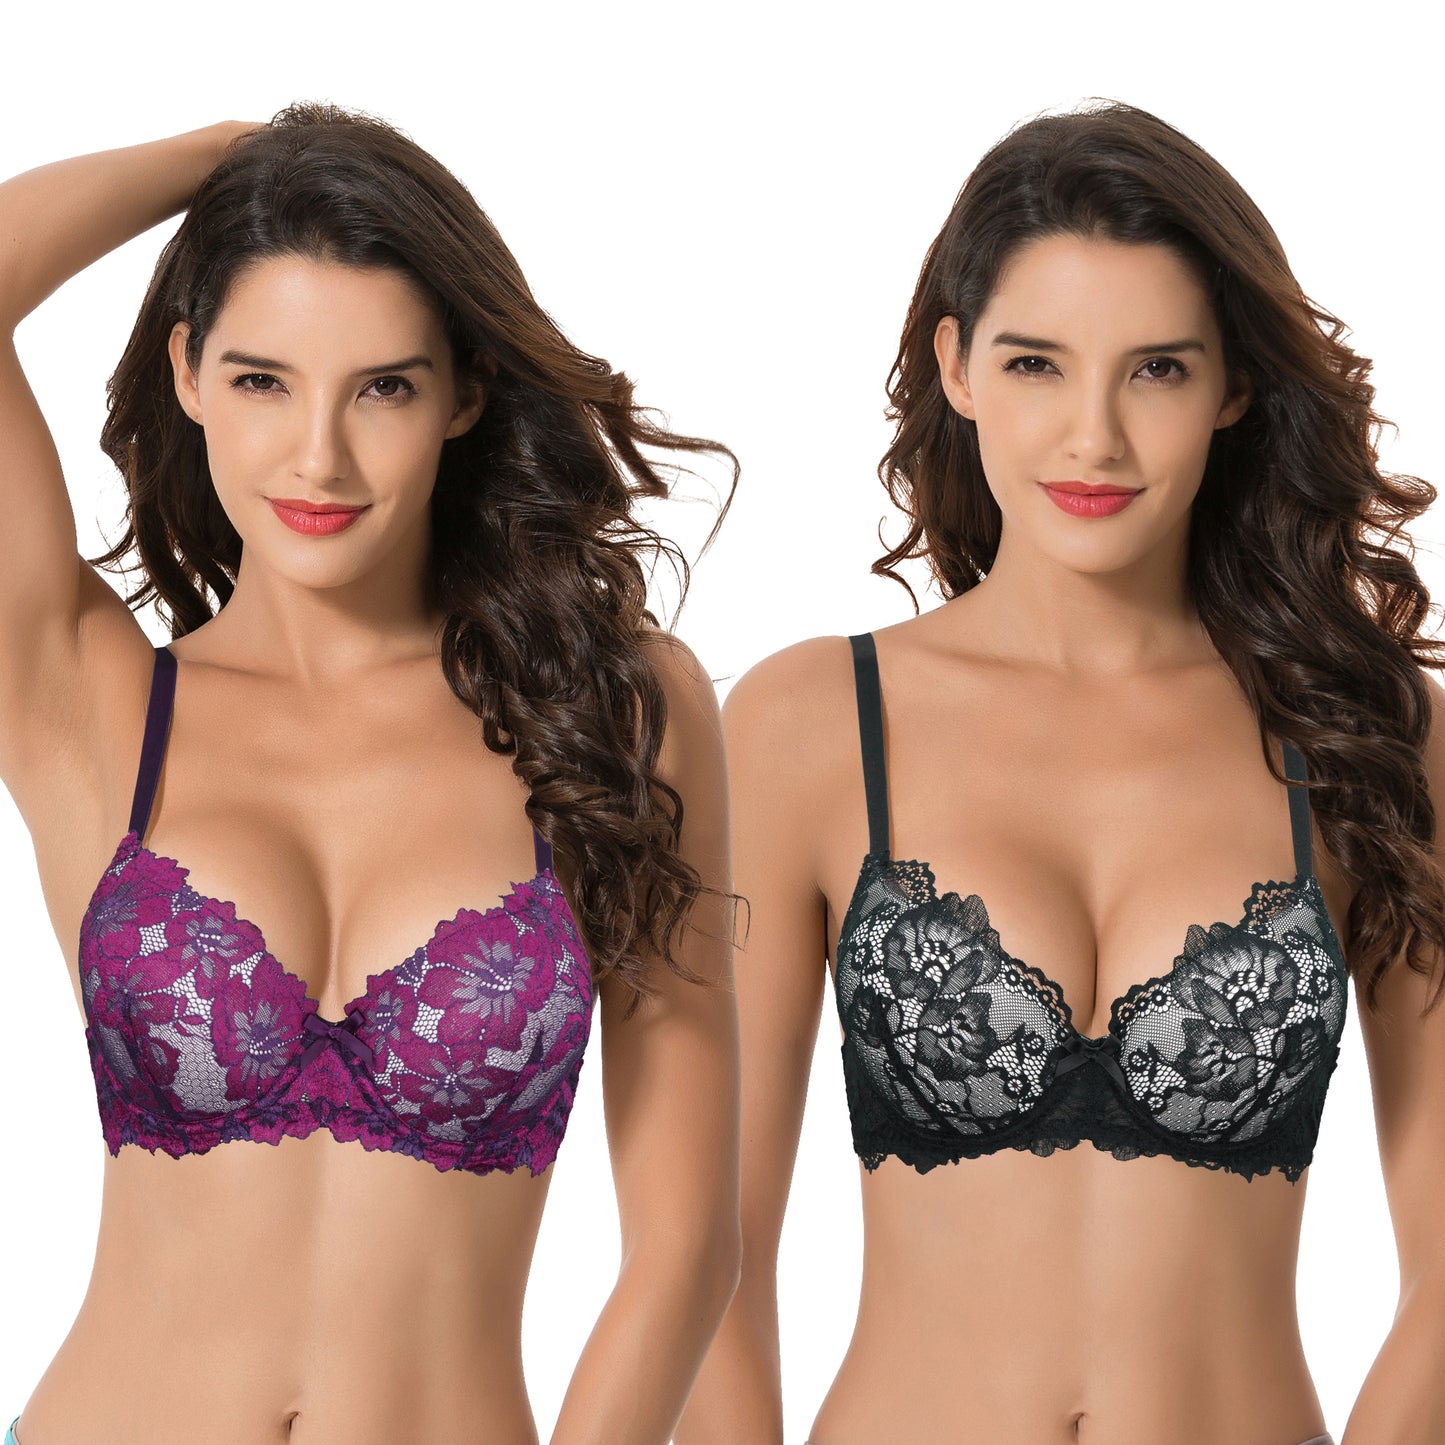 Women's Plus Size Push Up Add 1 Cup Underwire Perfect Shape Lace Bras